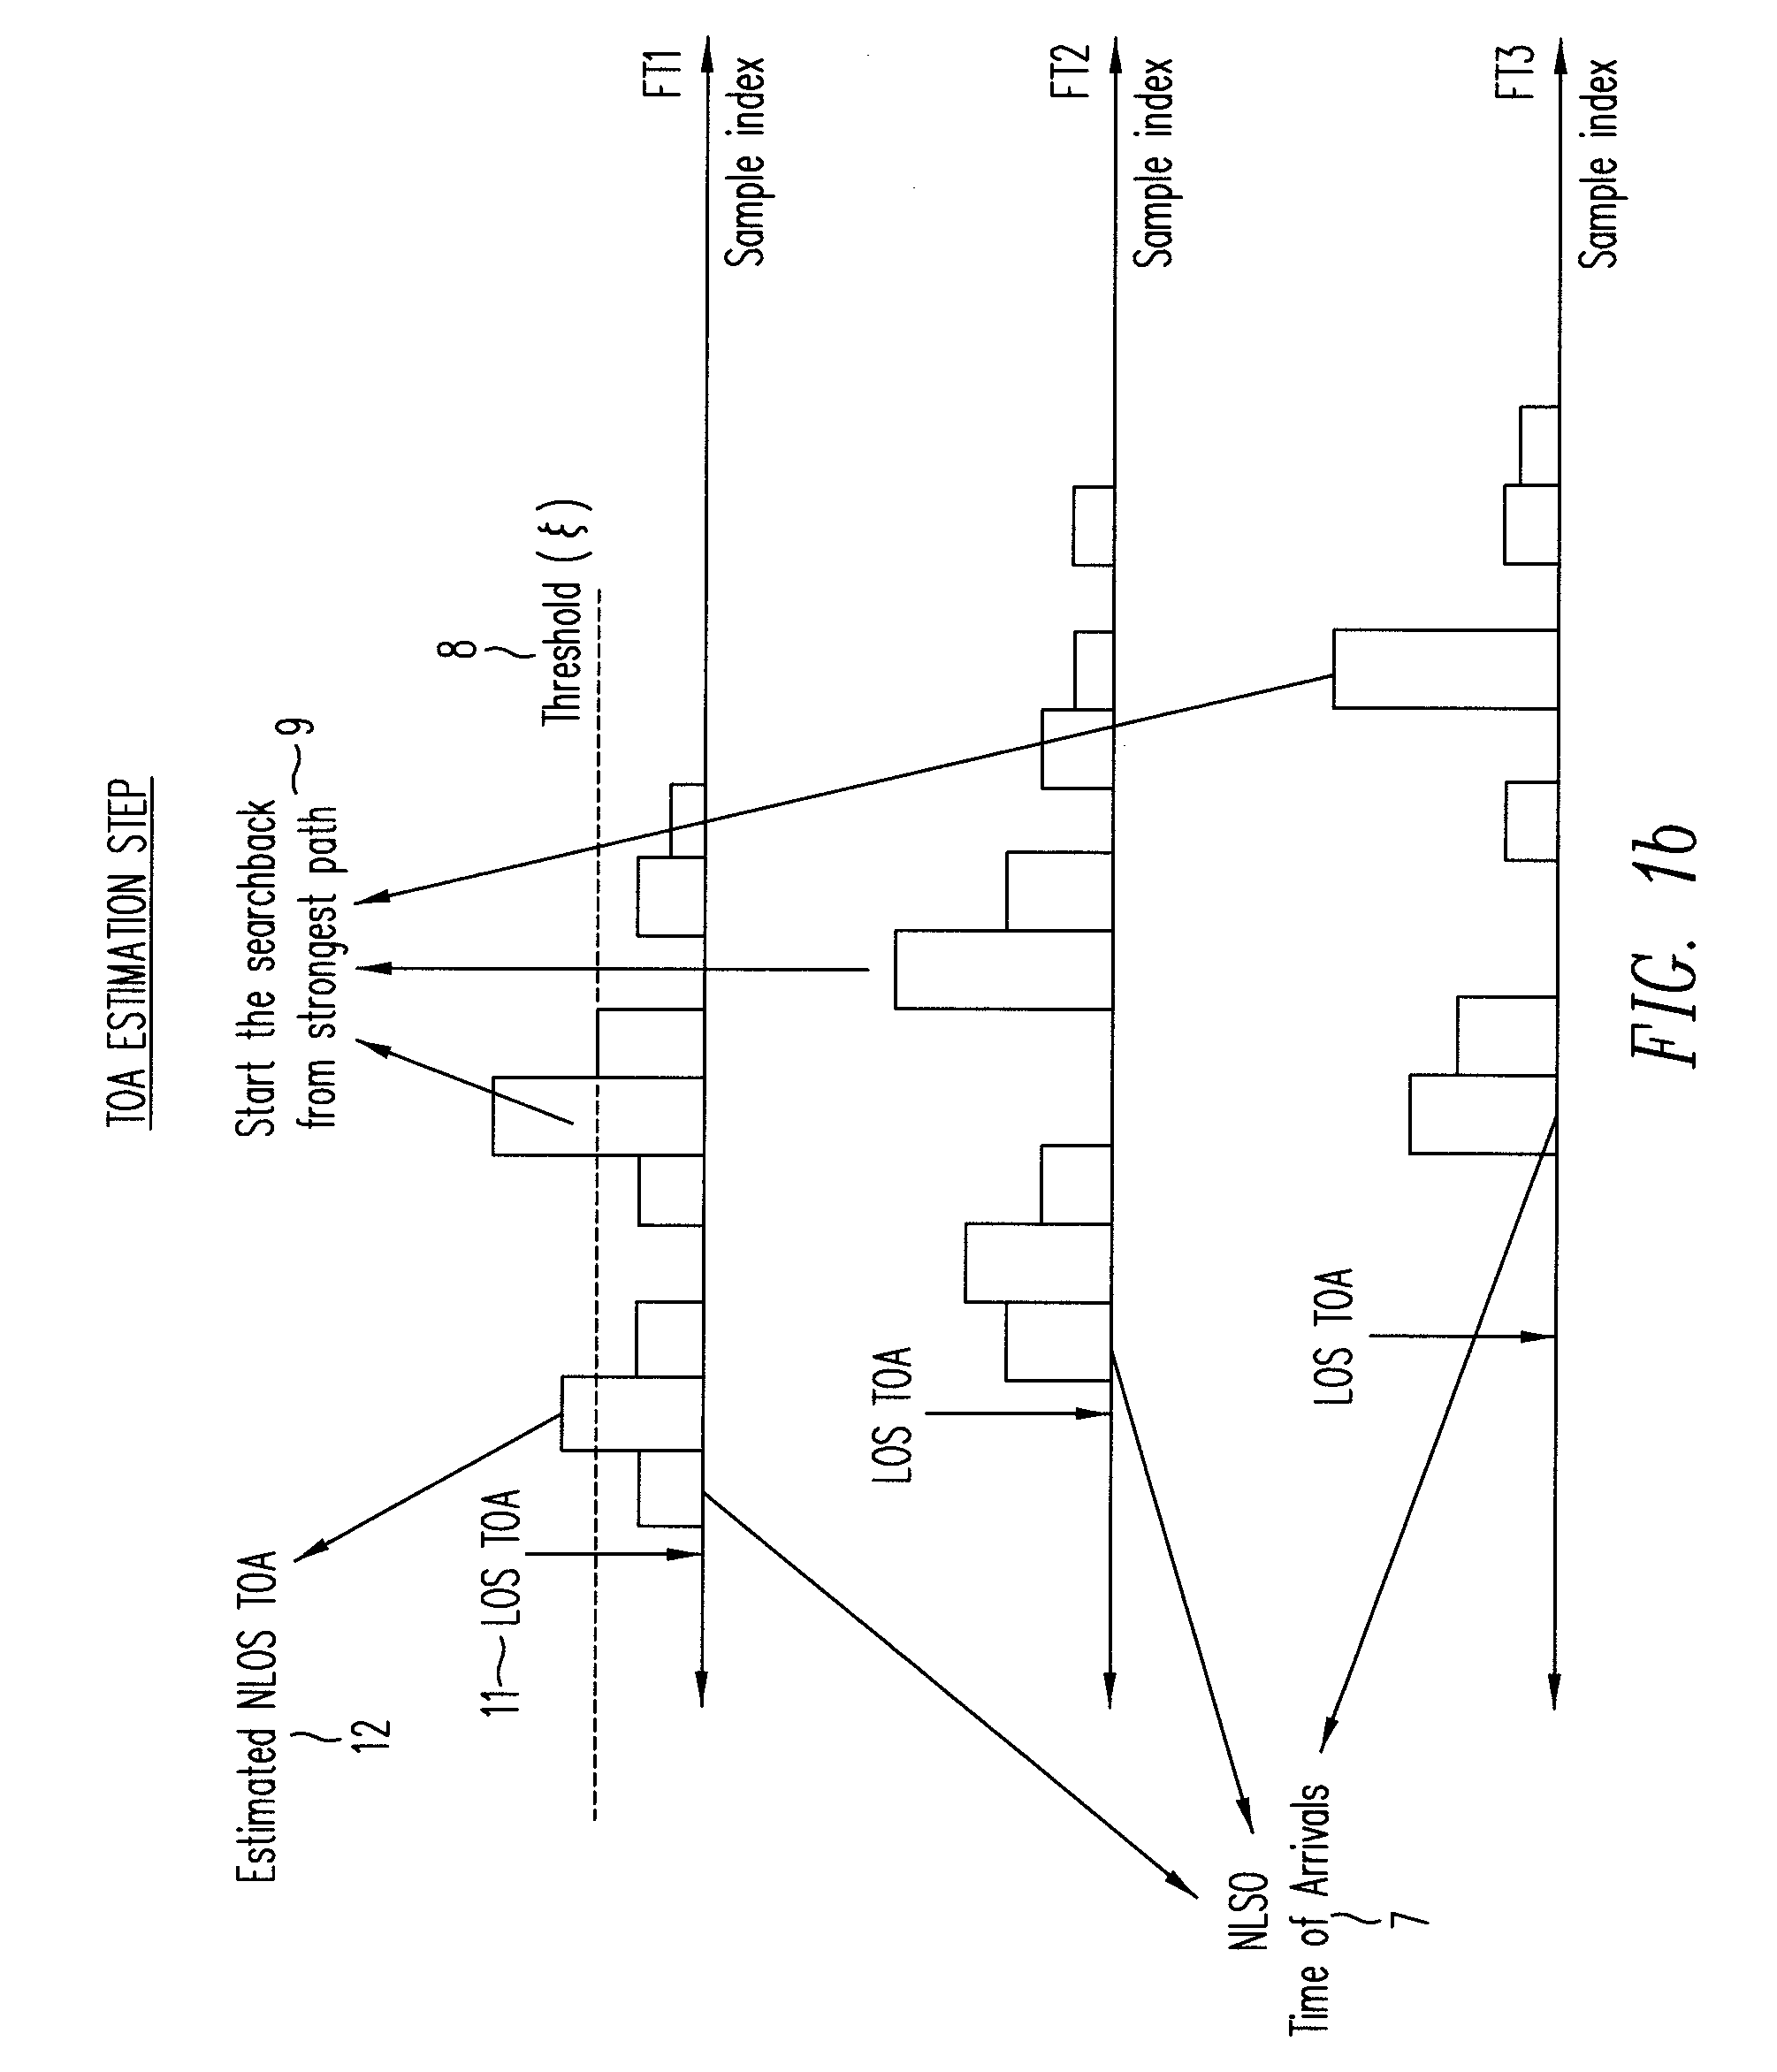 Line-of-sight (LOS) or non-LOS (NLOS) identification method using multipath channel statistics